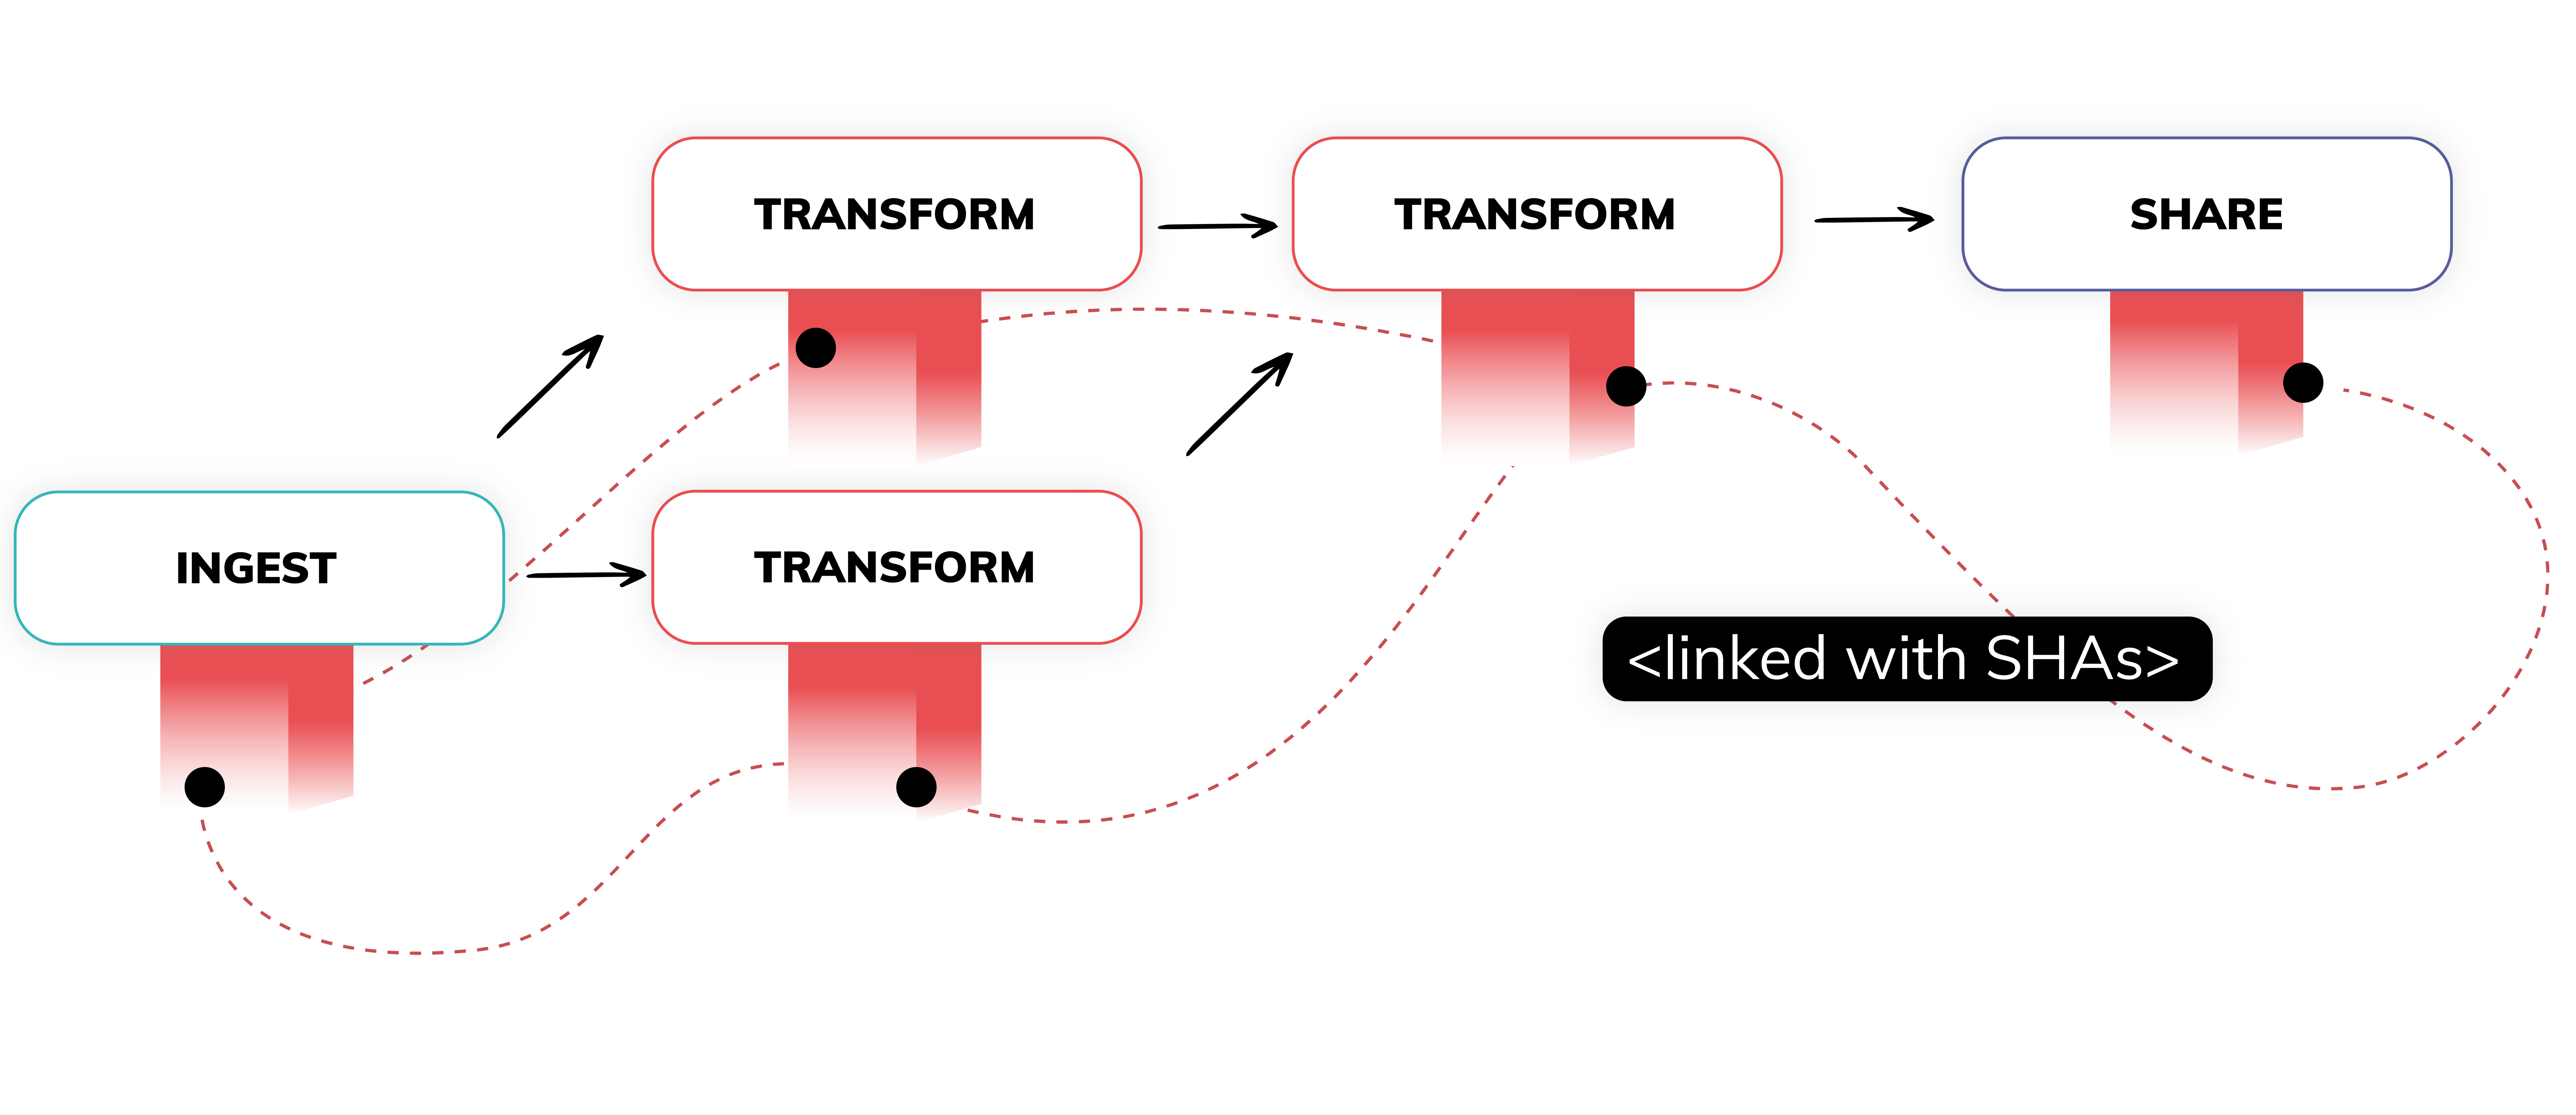 Visual representation of the fingerprinting framework that allows automated change management in Ascend's data pipeline automation platform.